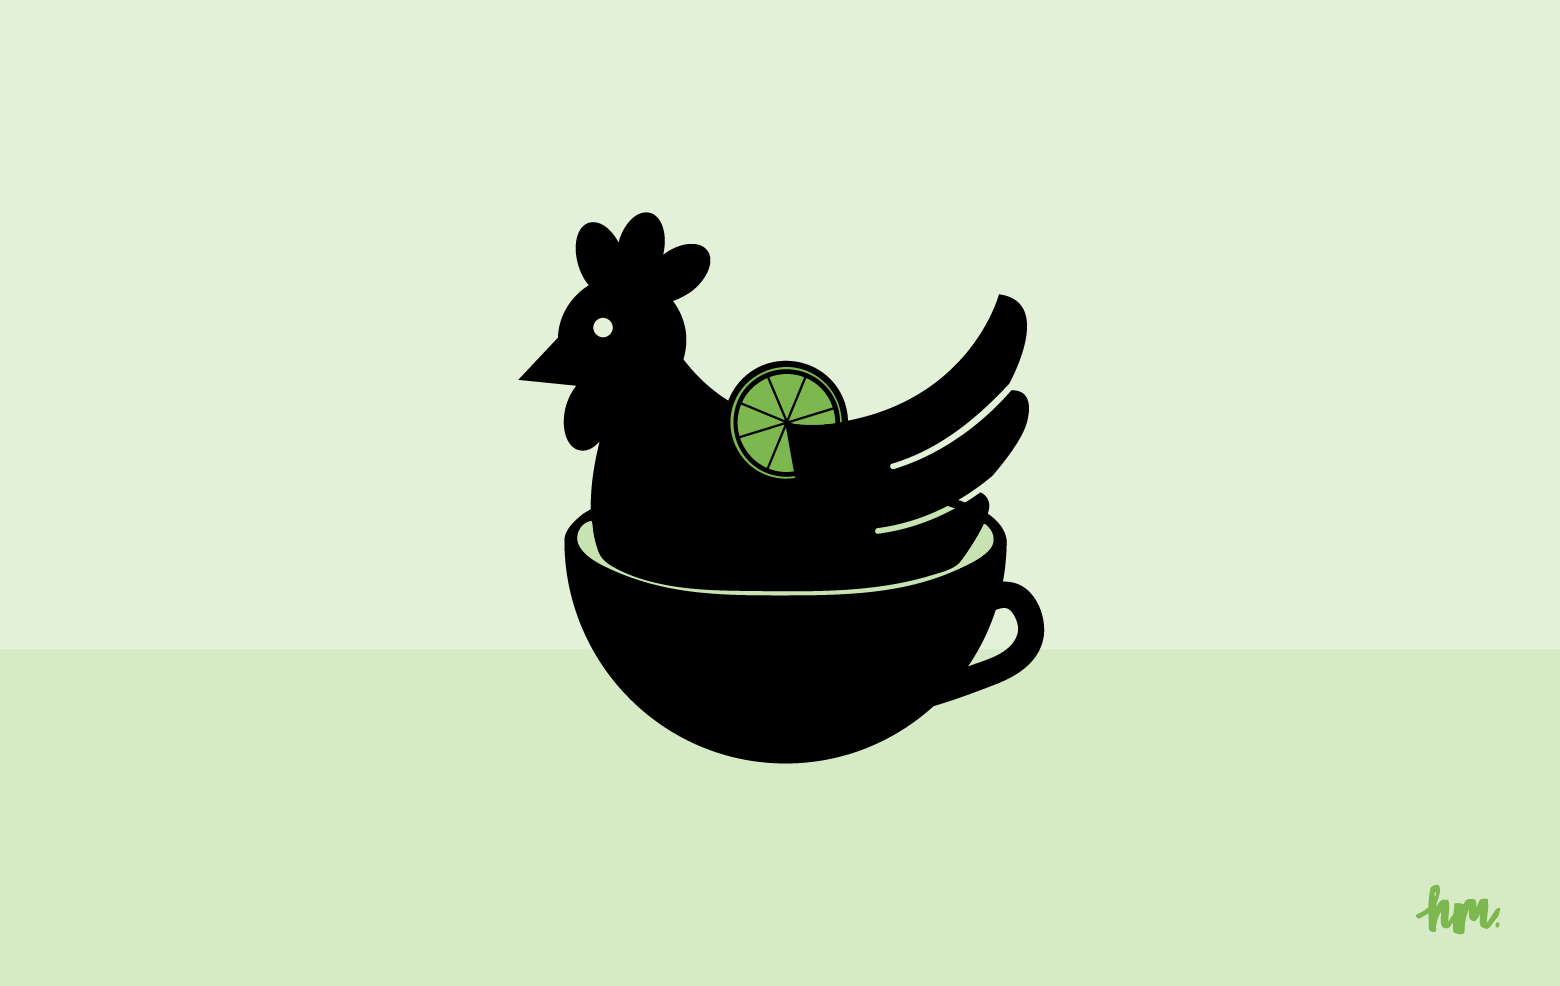 Illustration of a chicken with a lime wedge on its back inside a large mug.